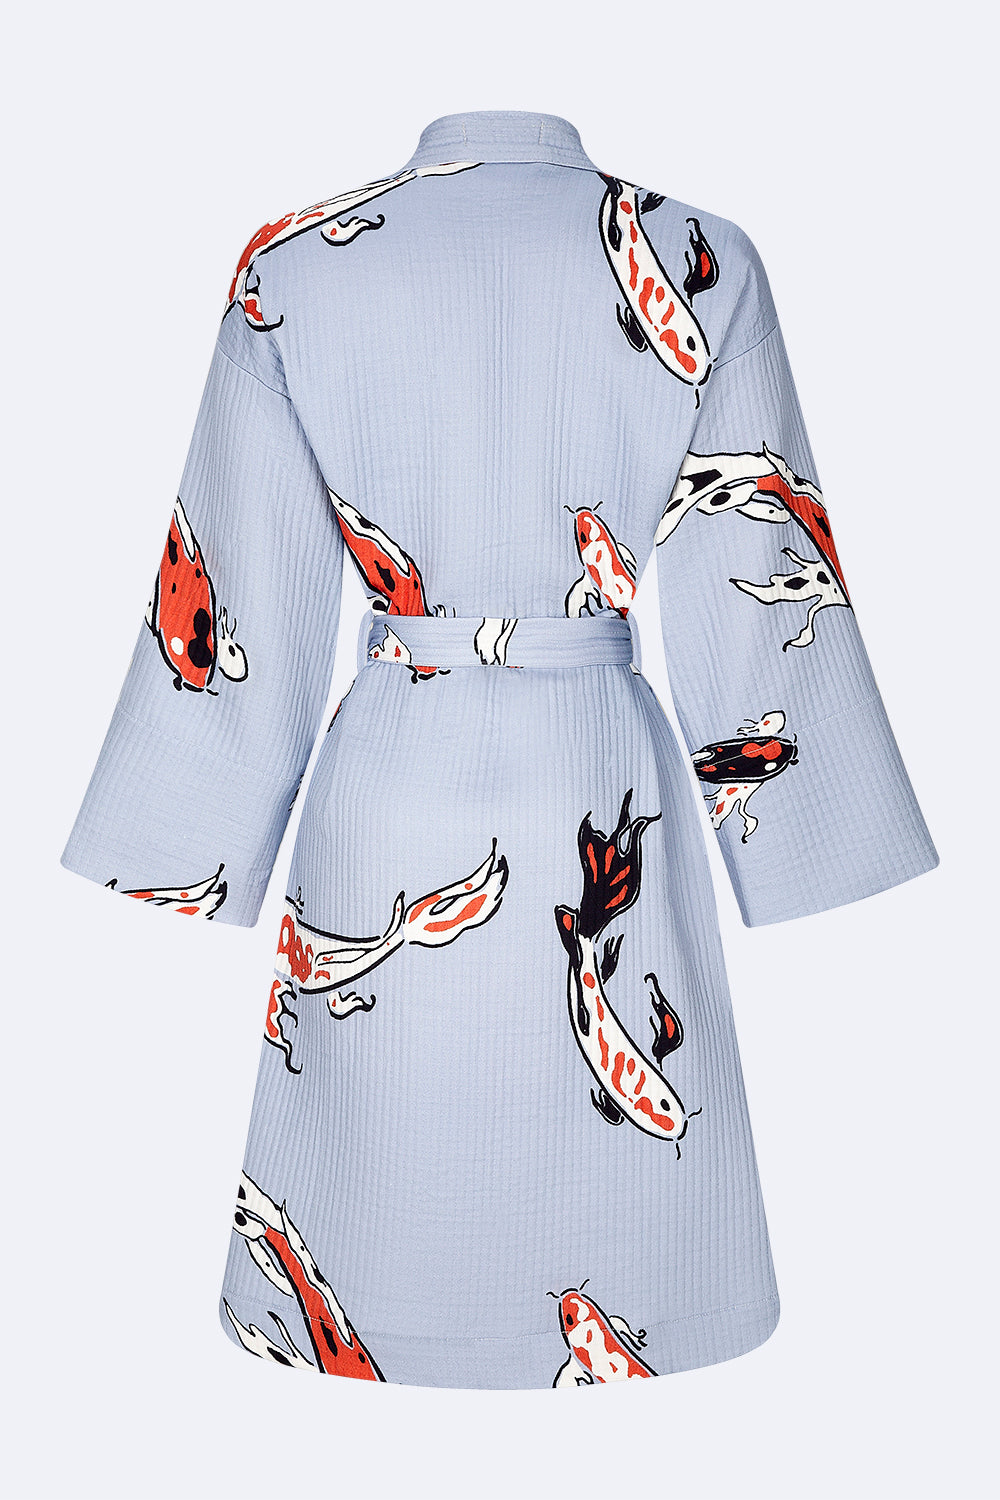 Koi Fish Kimono - 100% cotton with koi fish pattern in blue and red tones, can be used as a bath or home robe but also as a jacket